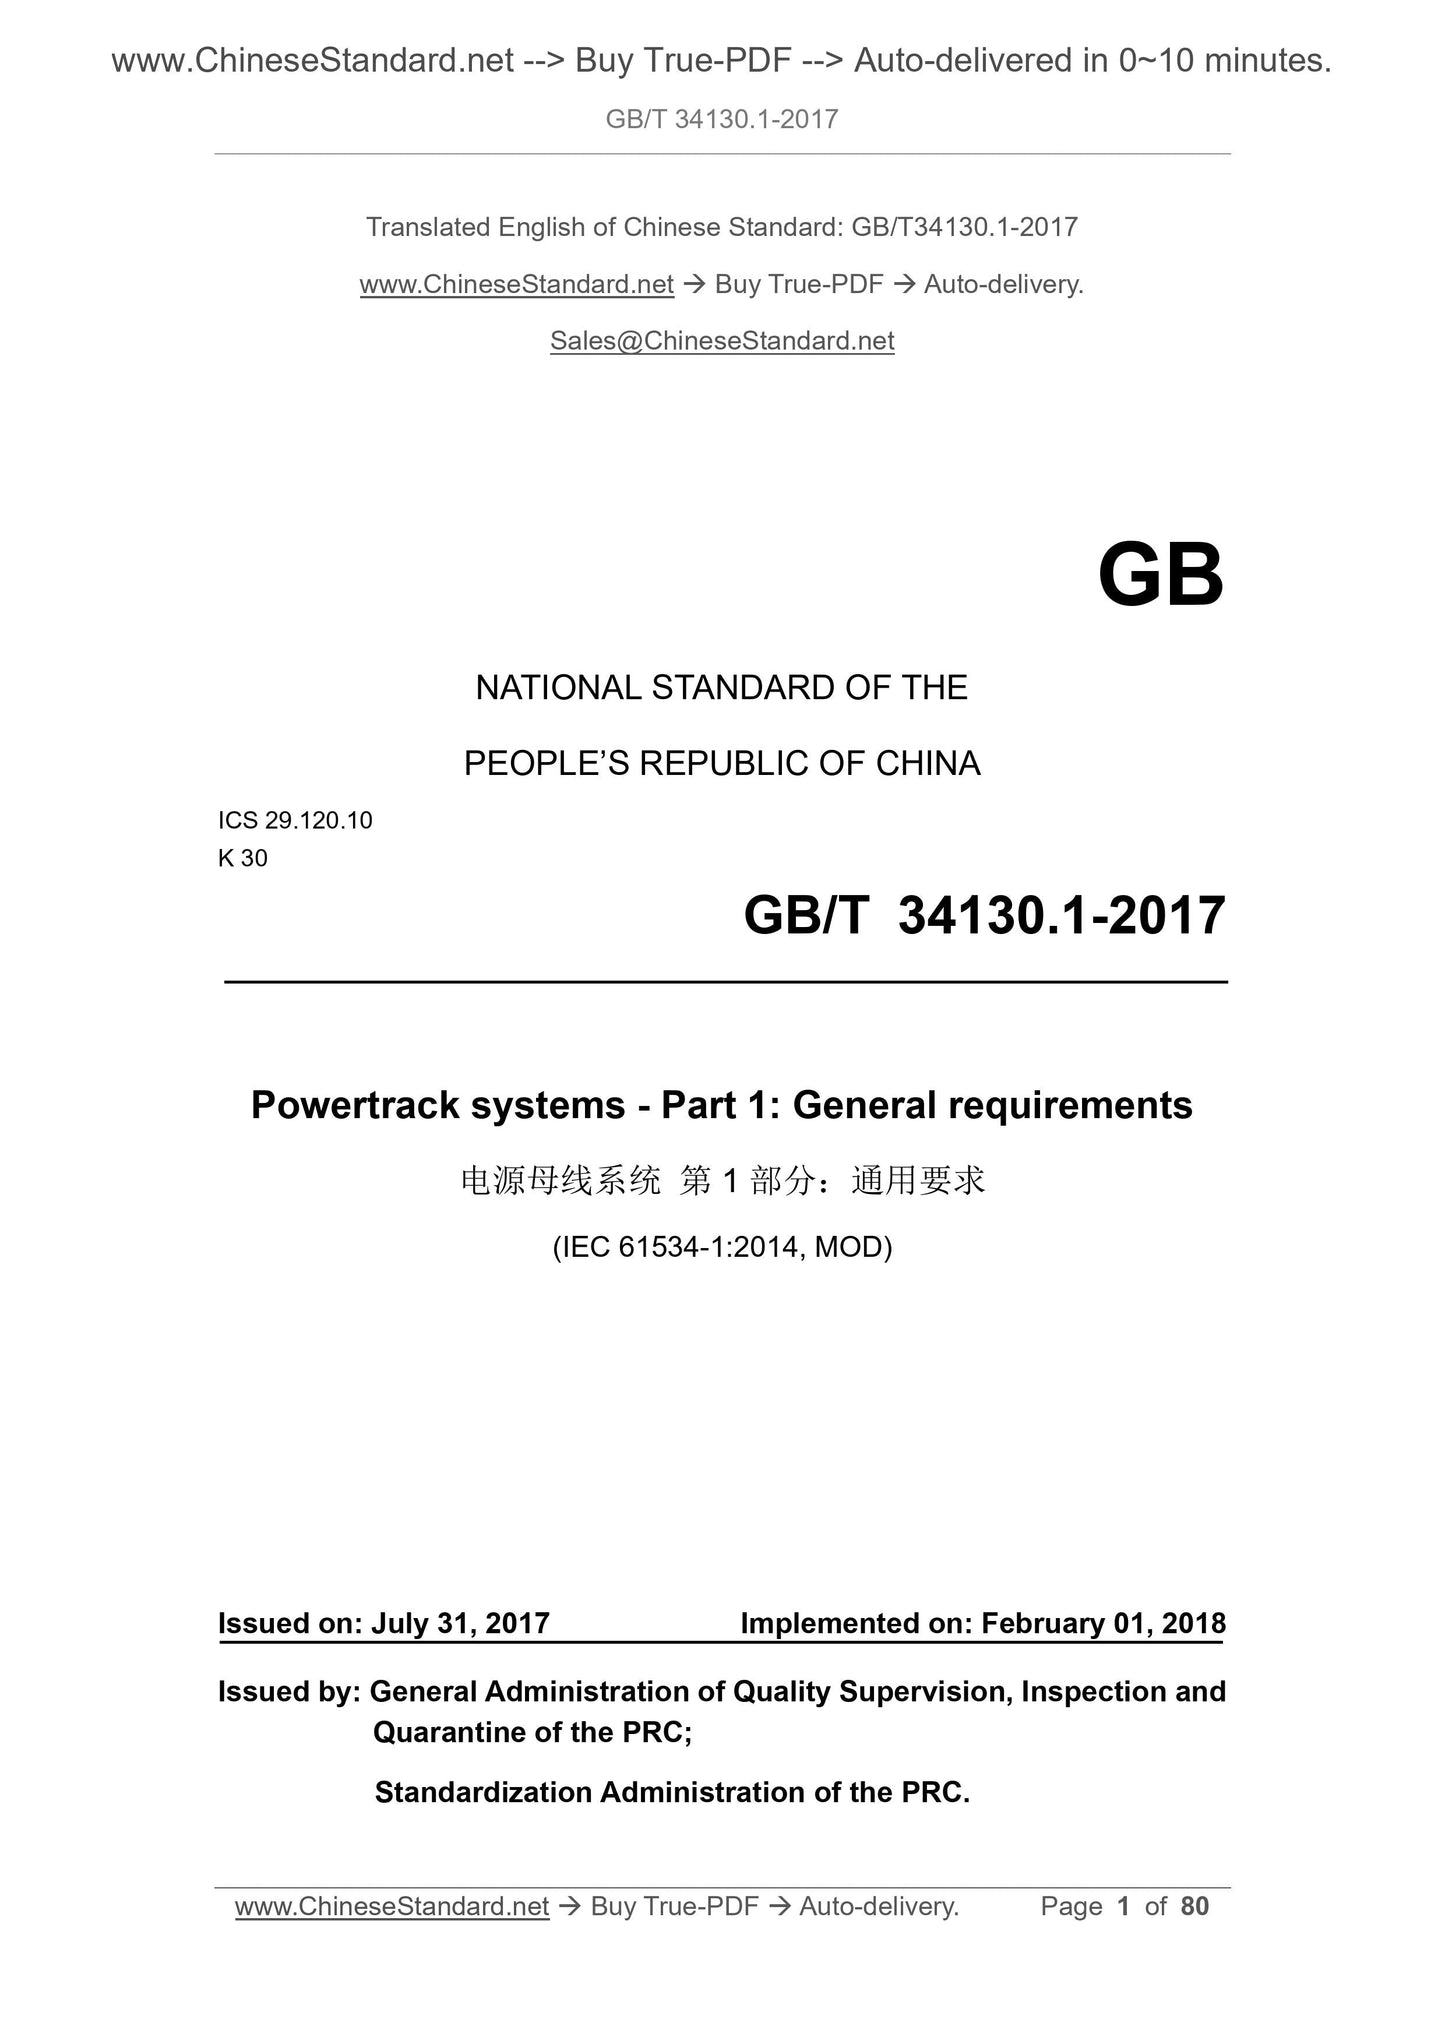 GB/T 34130.1-2017 Page 1